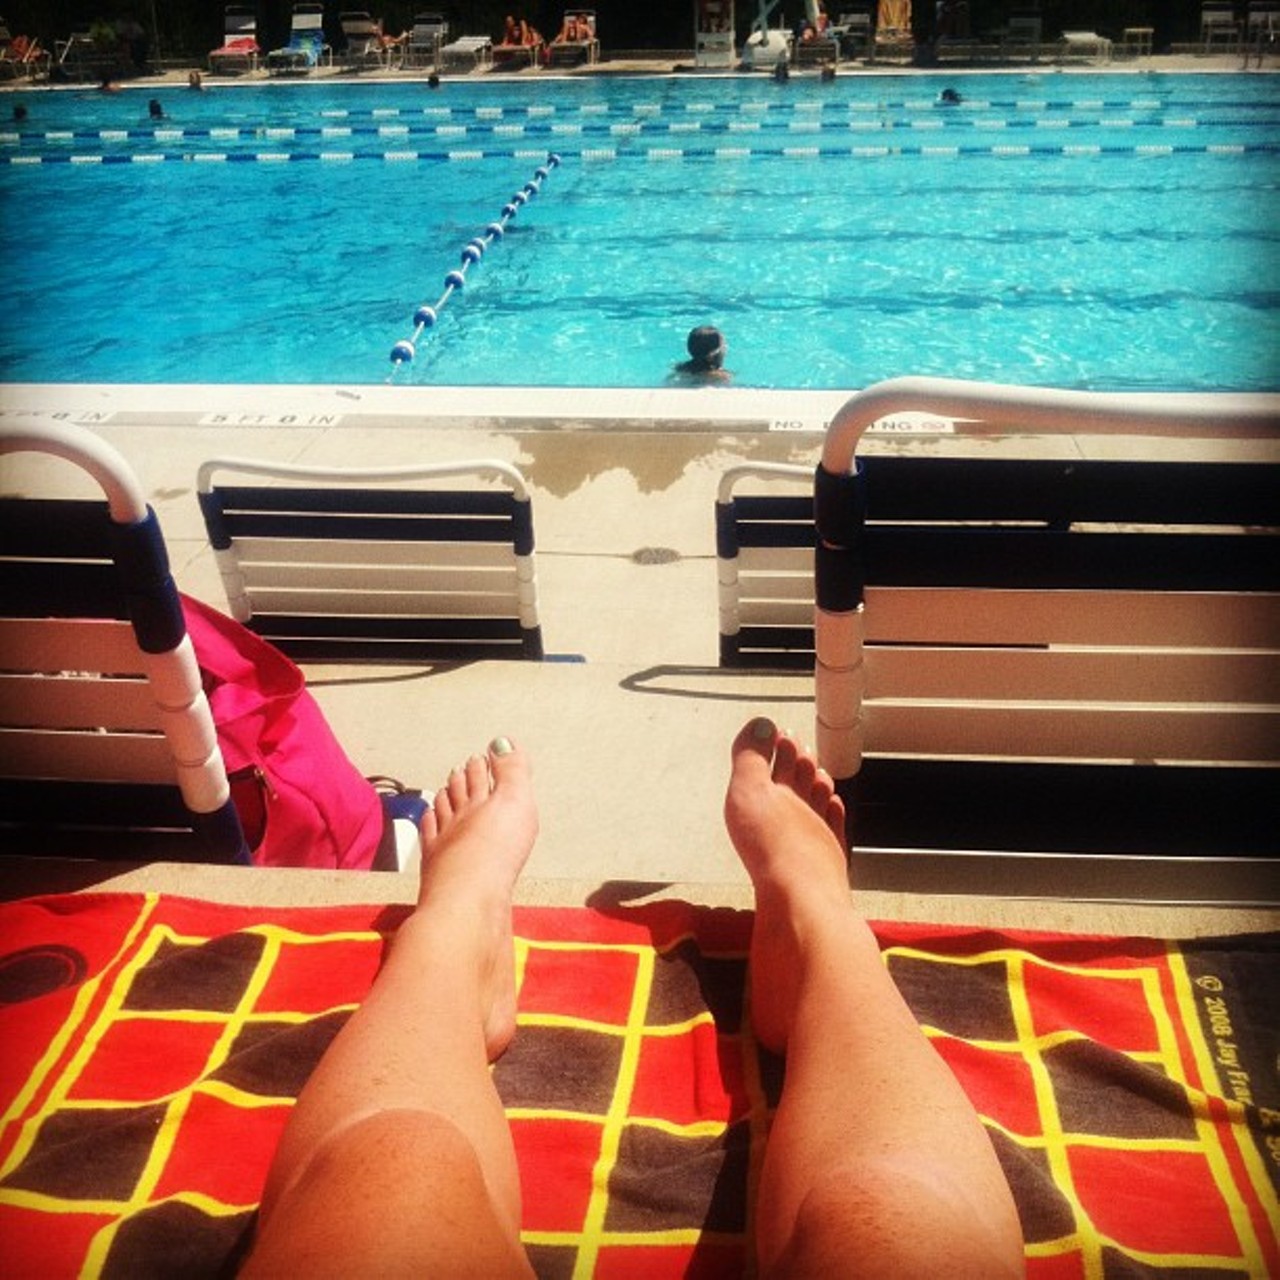 GO SWIMMING
Yep, it's still swimming time. Some pools are open until labor day. Get in while the kids aren't able to pee in there.
Check it out here.
Photo courtesy of maribethl13 / Instagram